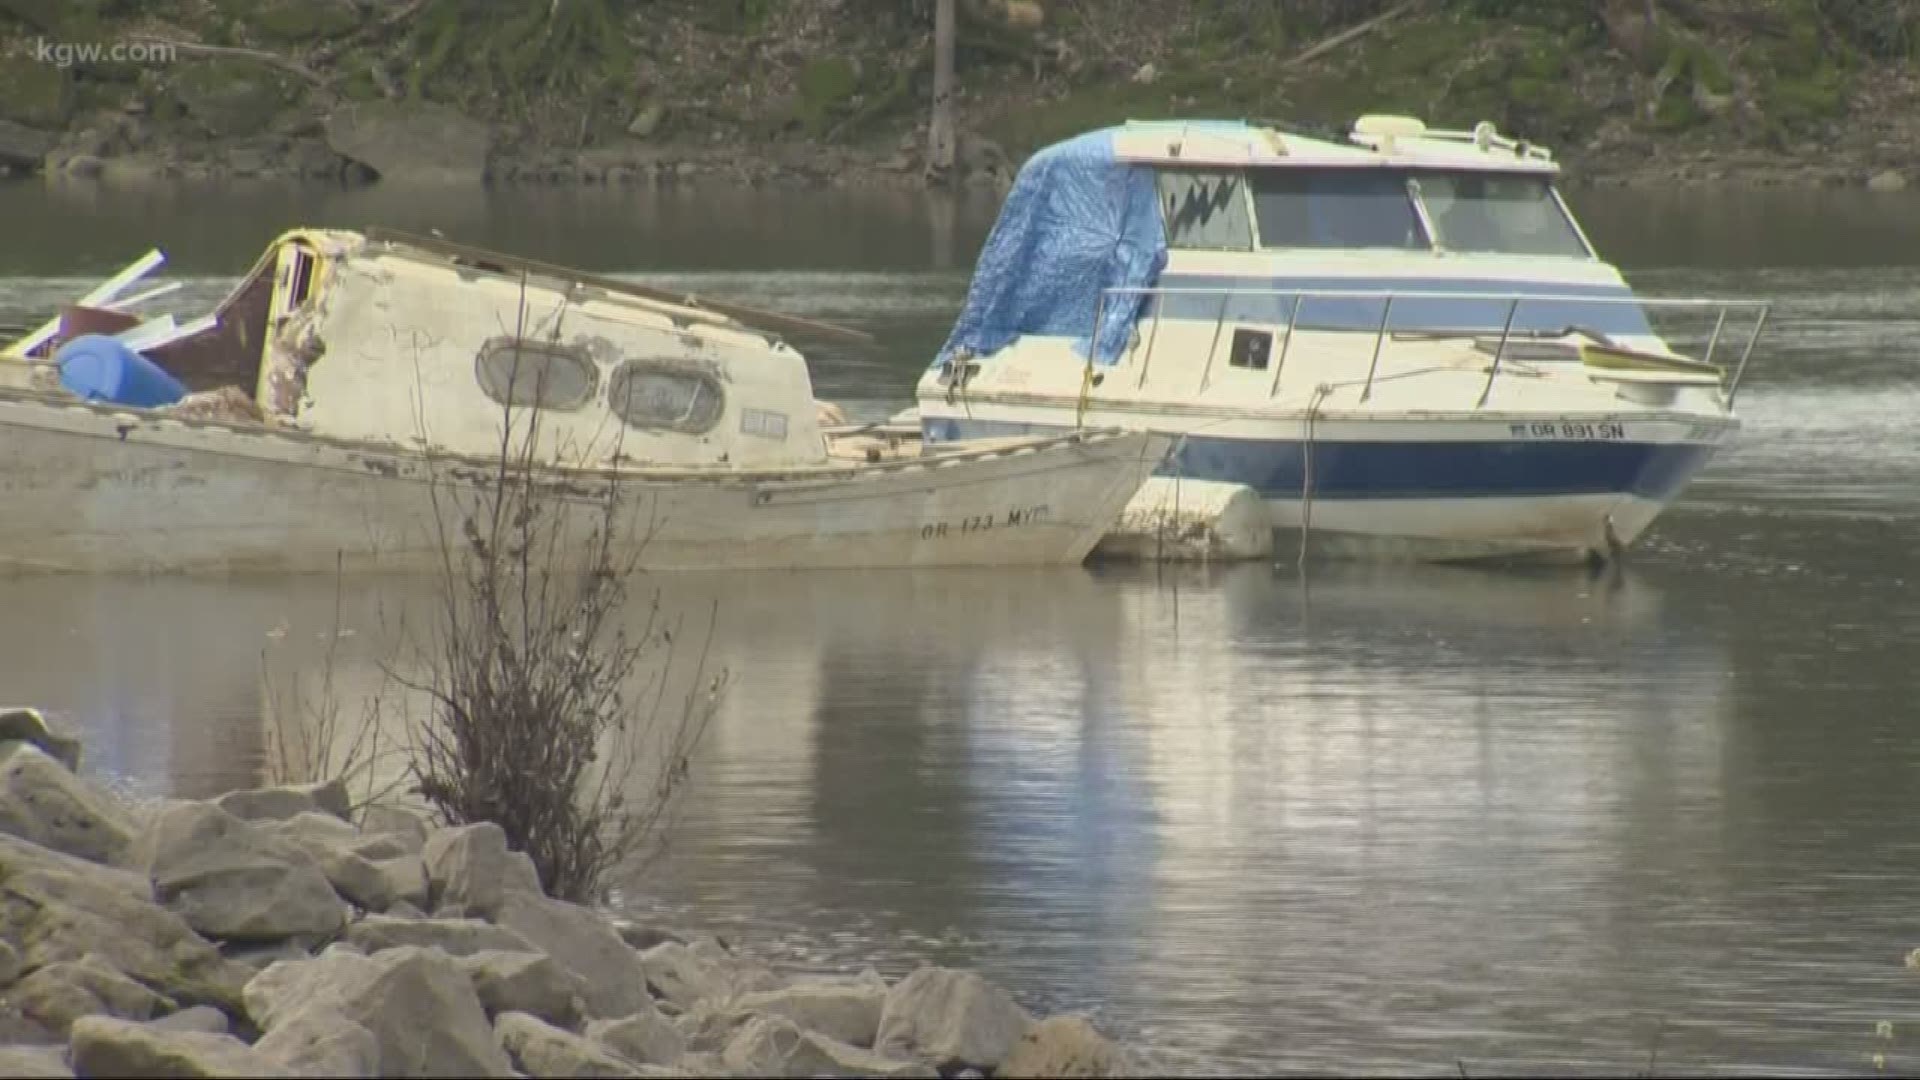 Sunken, toxic boats are finally being hauled out of the Columbia River.